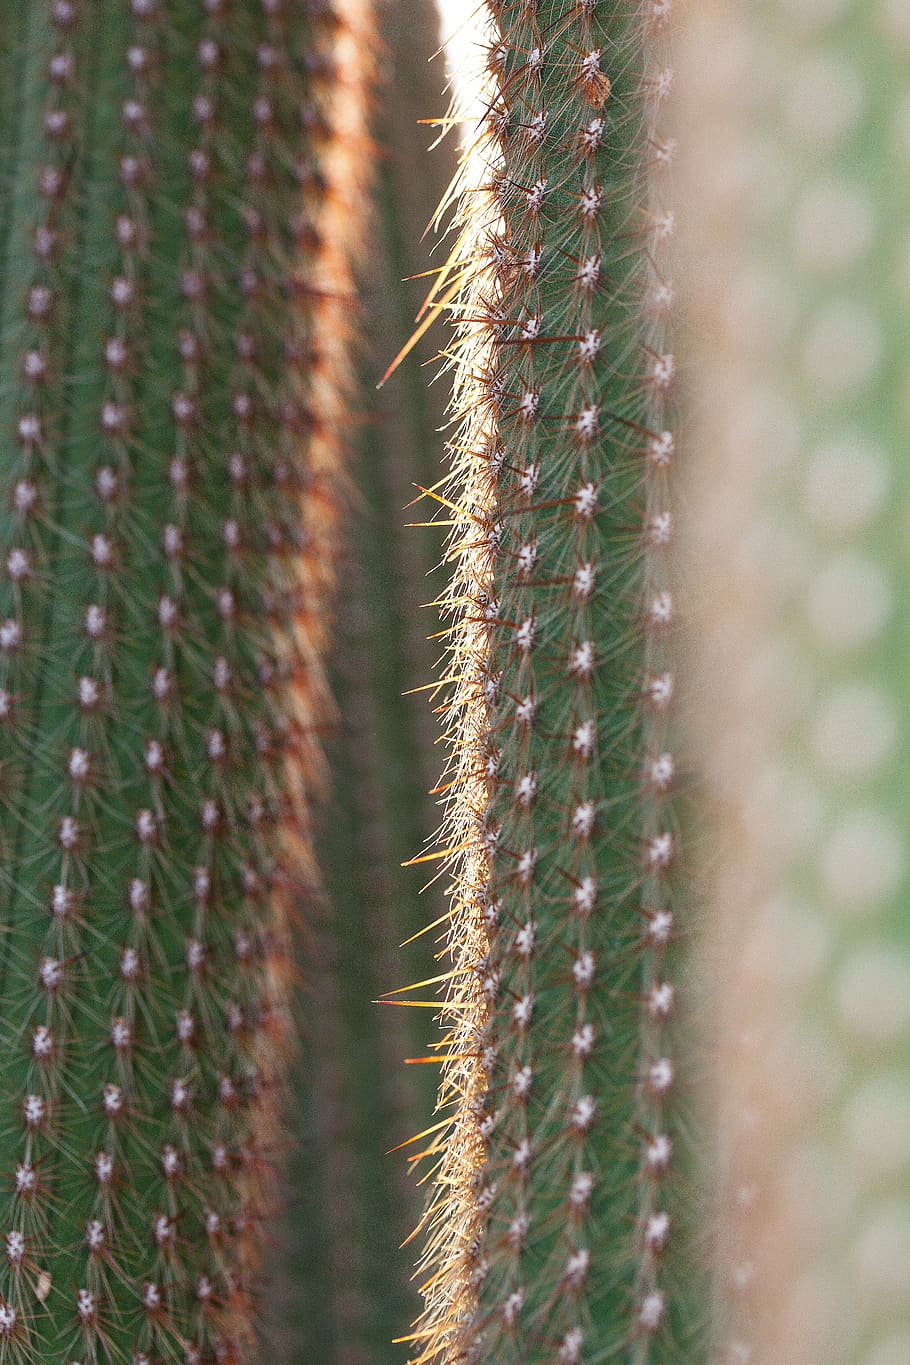 cactus, cactaceae, prickly, rip, thorns of means of, plant, flora, green, mexico, close-up